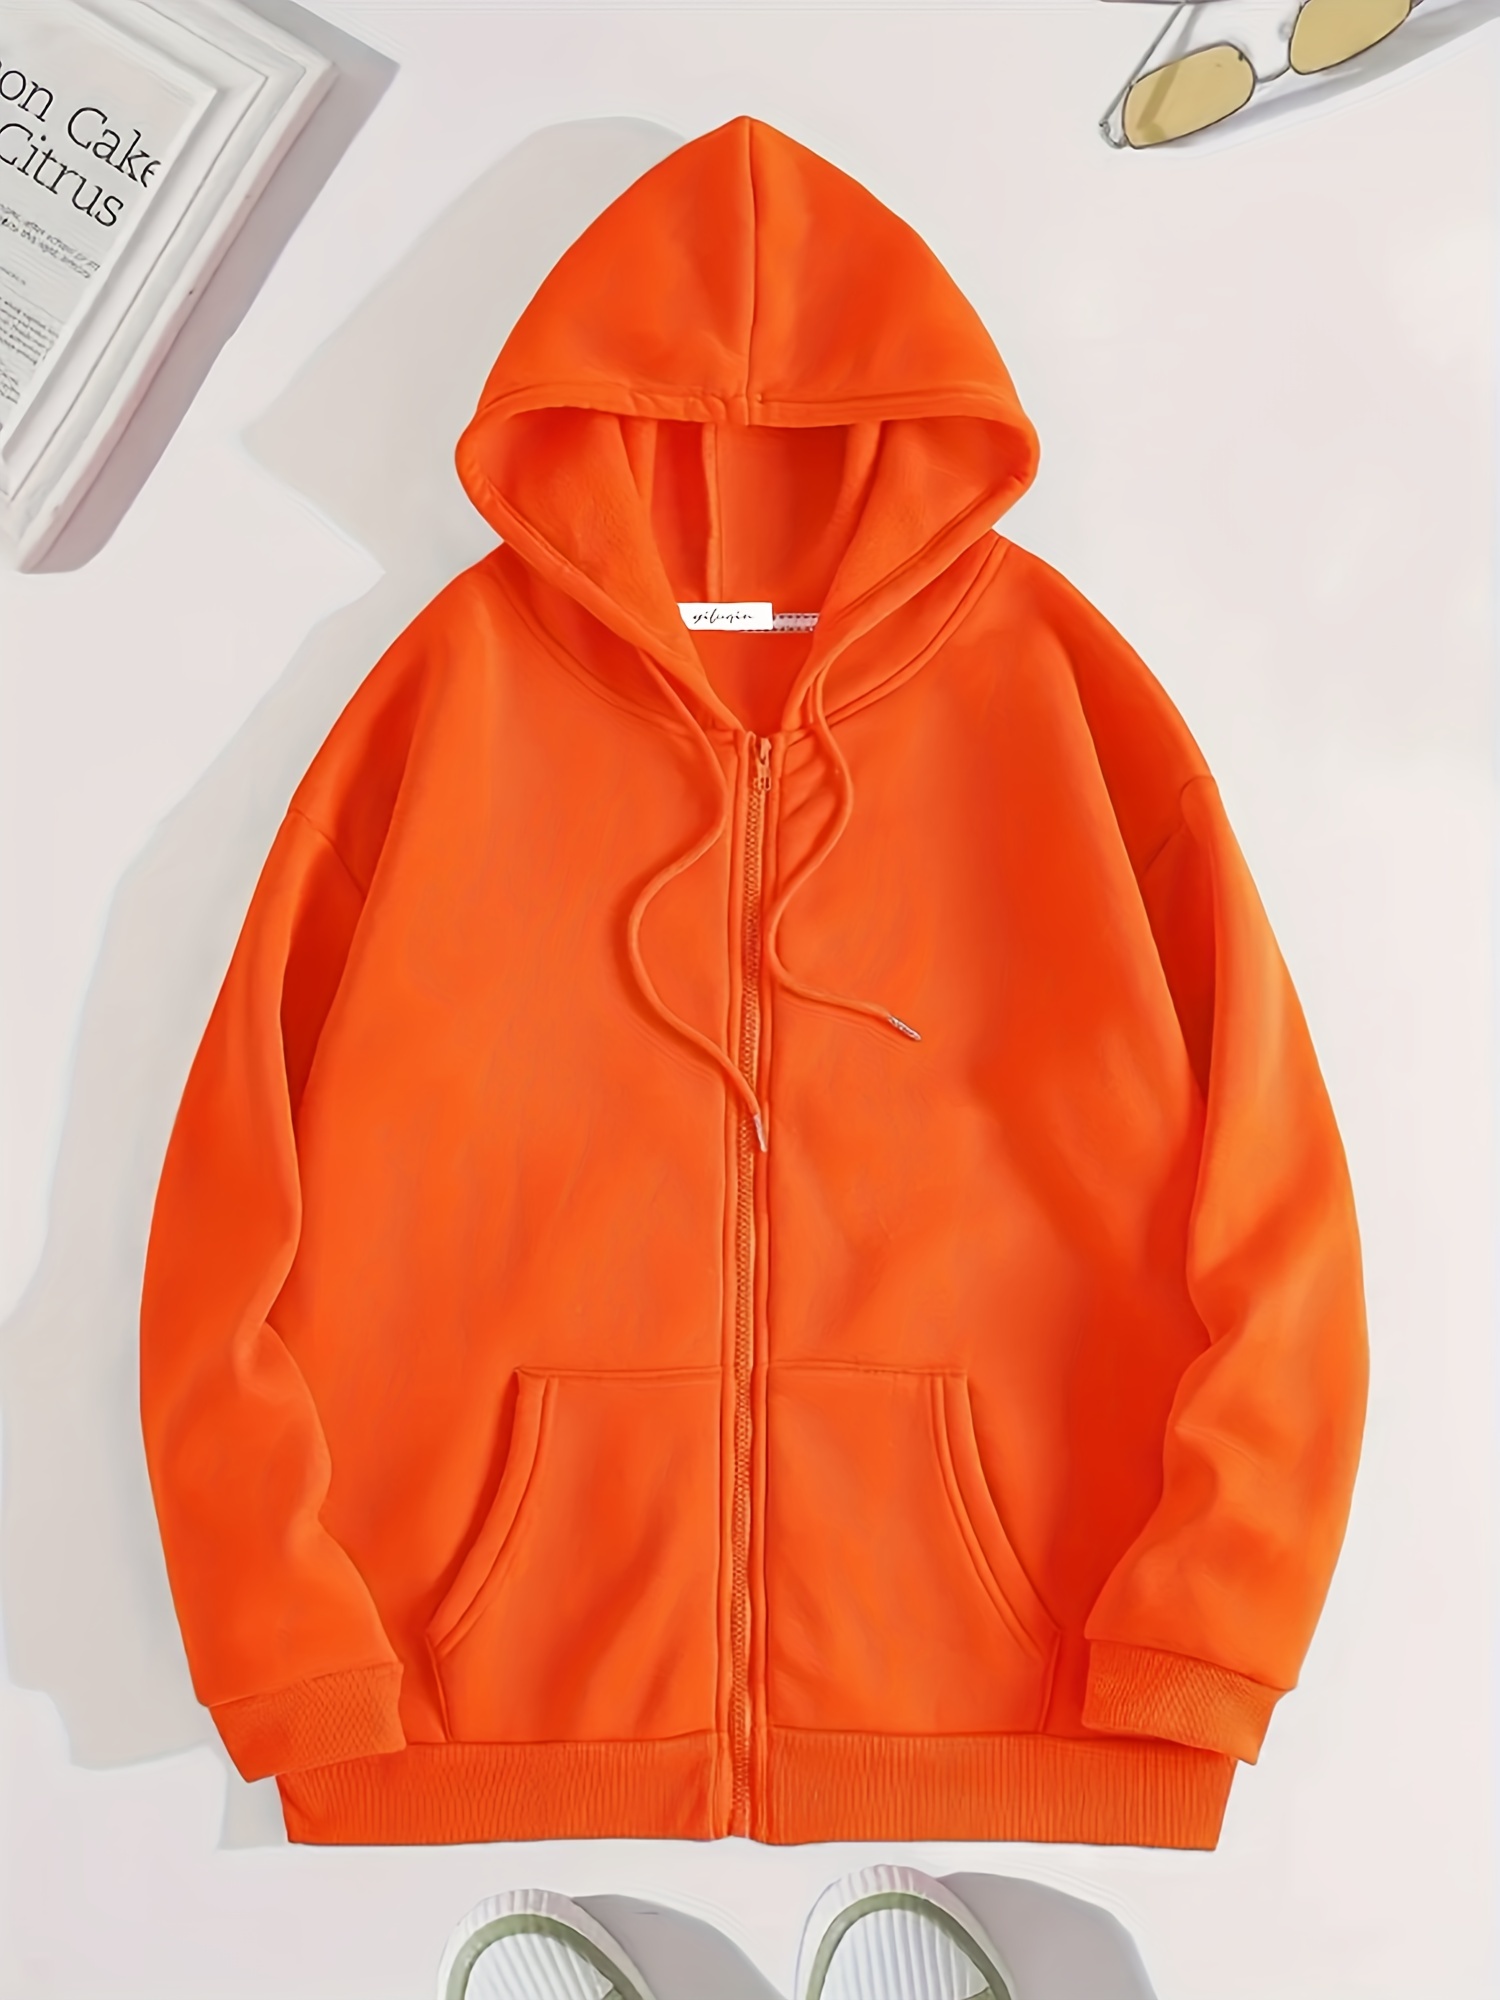 Women's Hoodies, Free Delivery